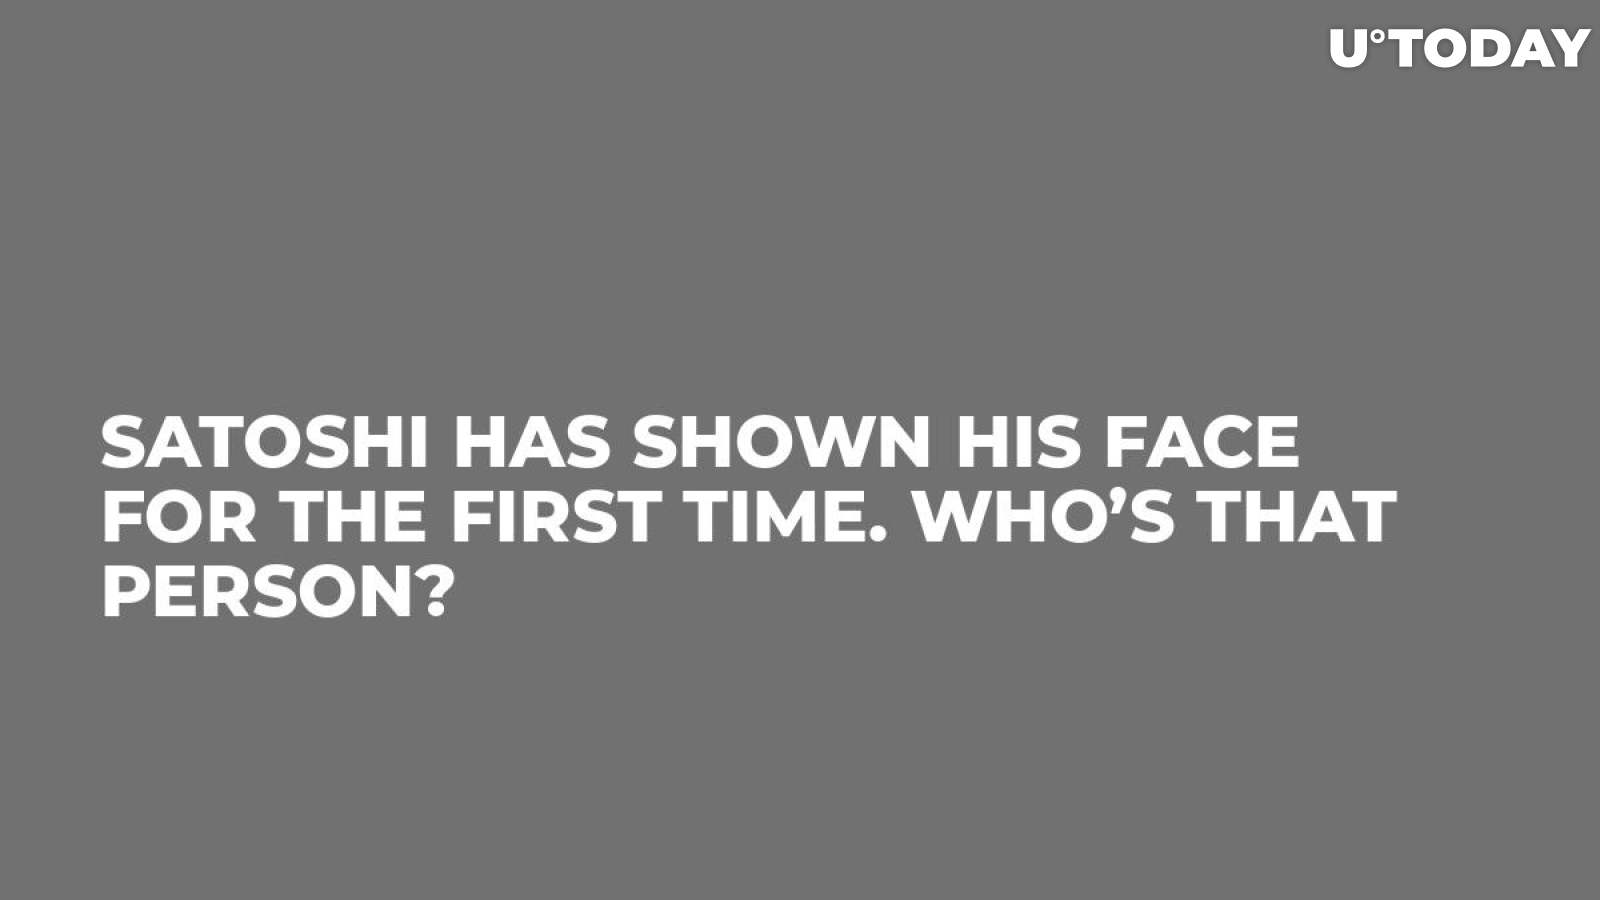 Satoshi Has Shown His Face for the First Time. Who’s That Person?